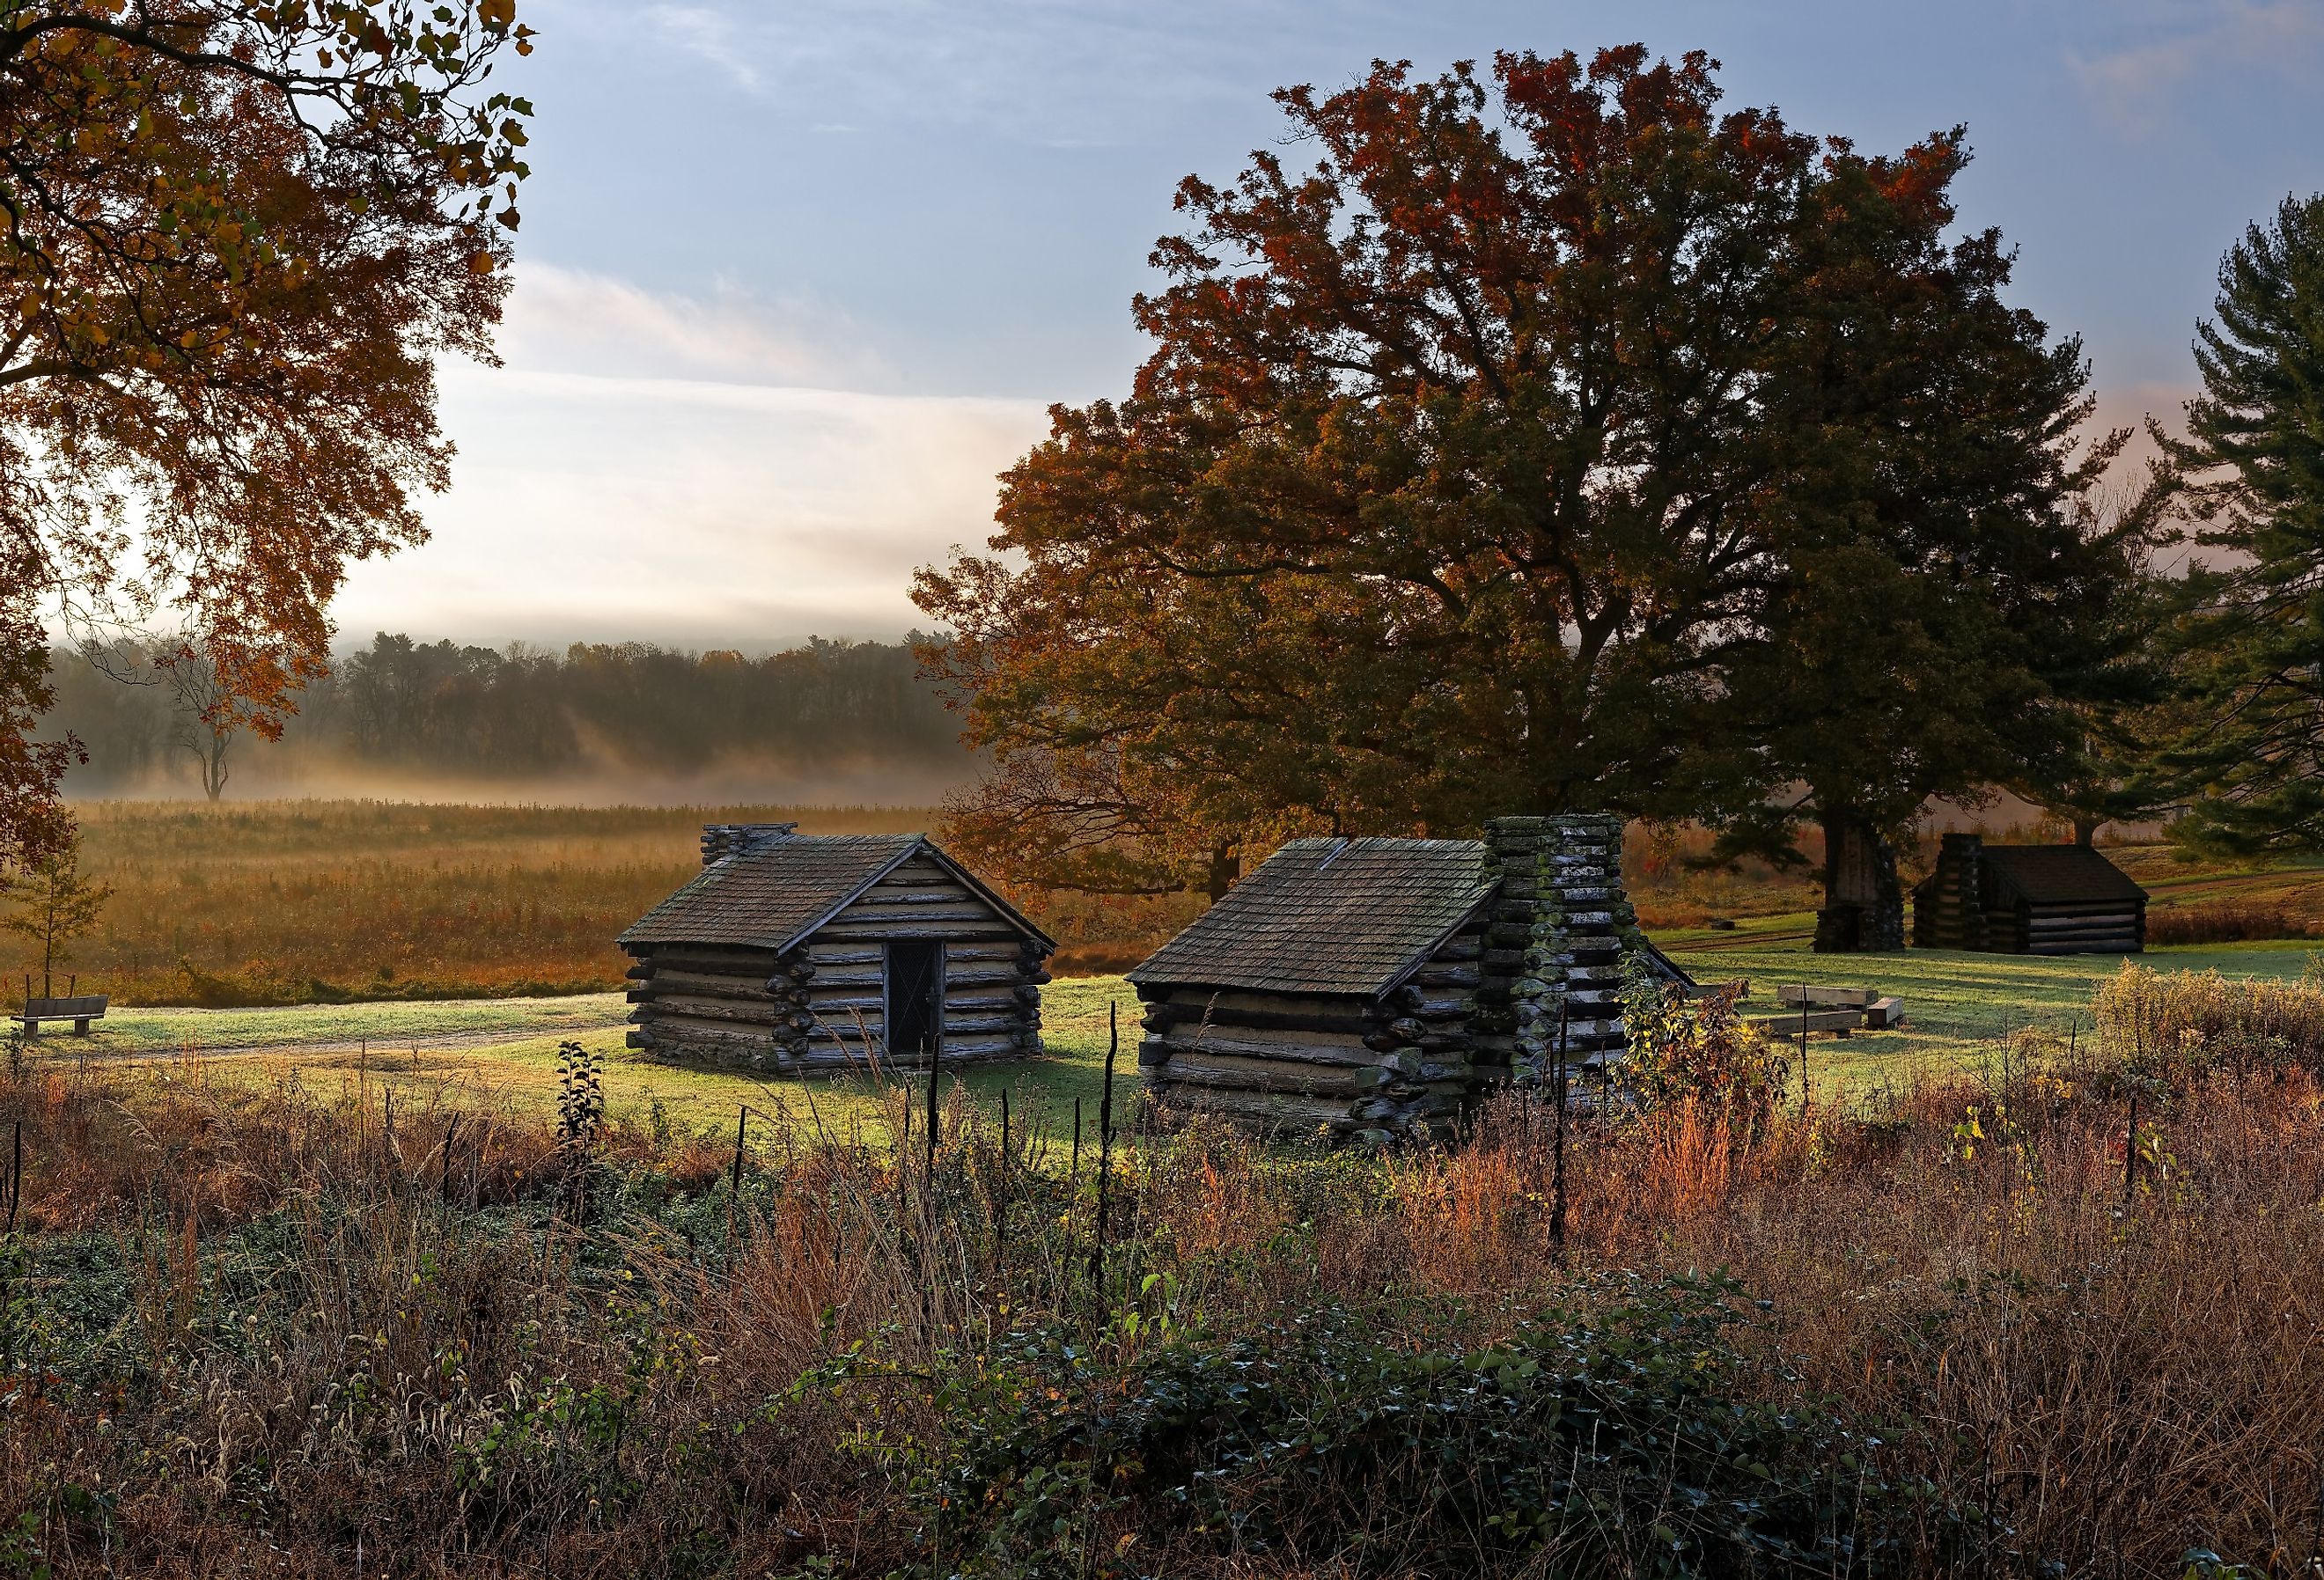 Misty morning at Valley Forge National Historic Park with revolutionary log houses. Image credit Delmas Lehman via AdobeStock.